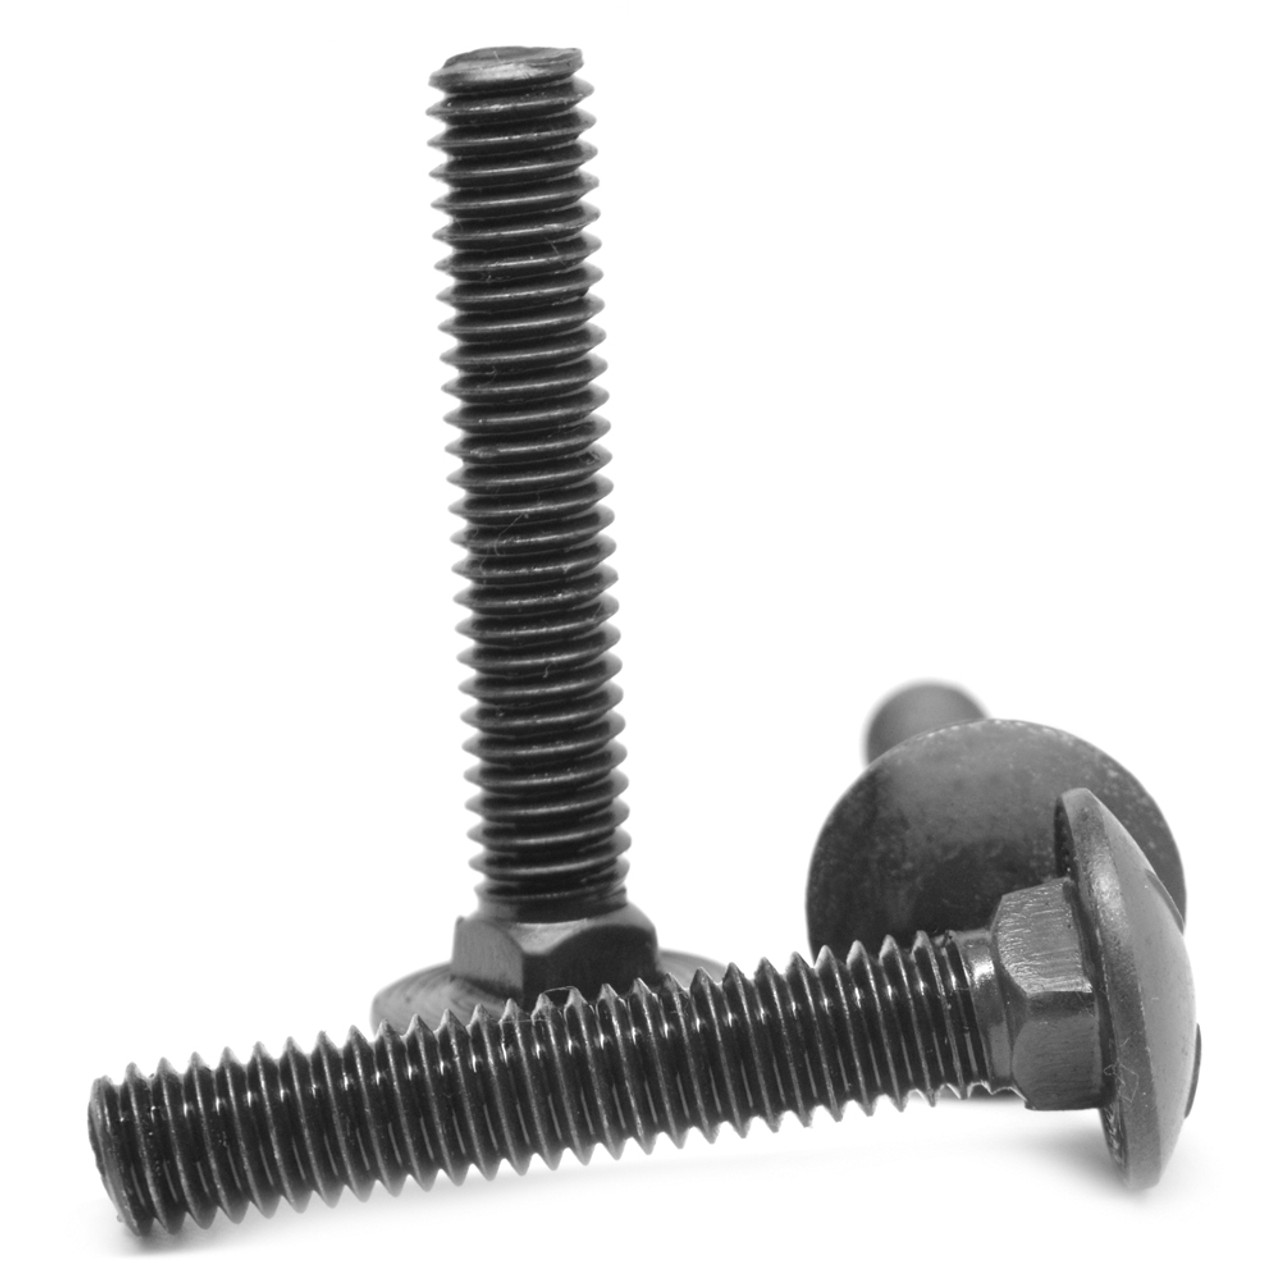 5/16-18 x 6 Coarse Thread Carriage Bolt Low Carbon Steel Black Oxide